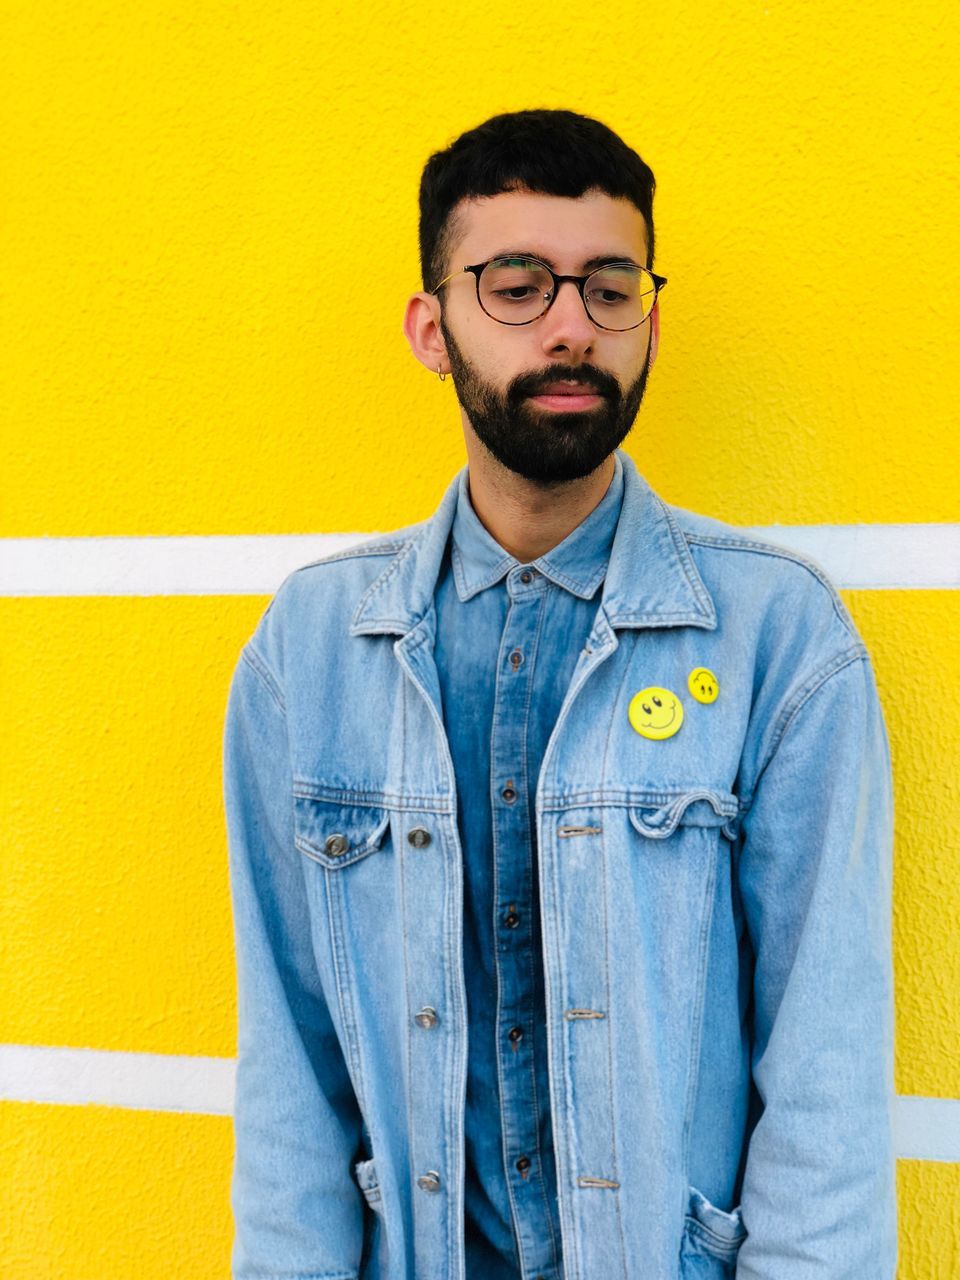 PORTRAIT OF YOUNG MAN STANDING BY YELLOW WALL